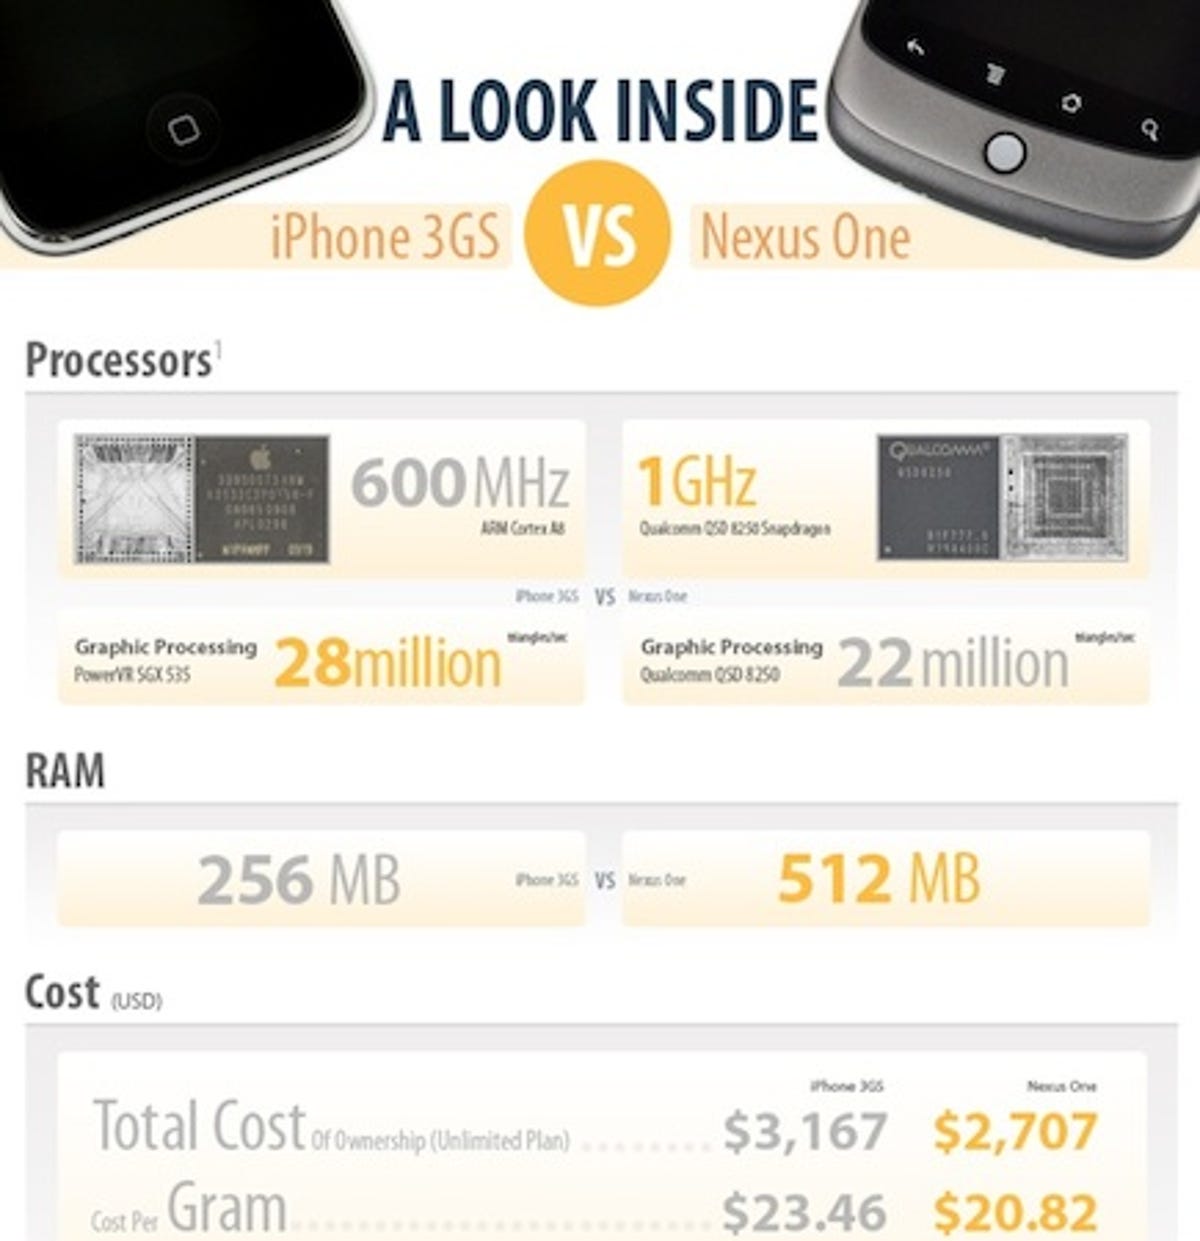 Google Nexus One seems to have a decided cost of ownership advantage, according to iFixit